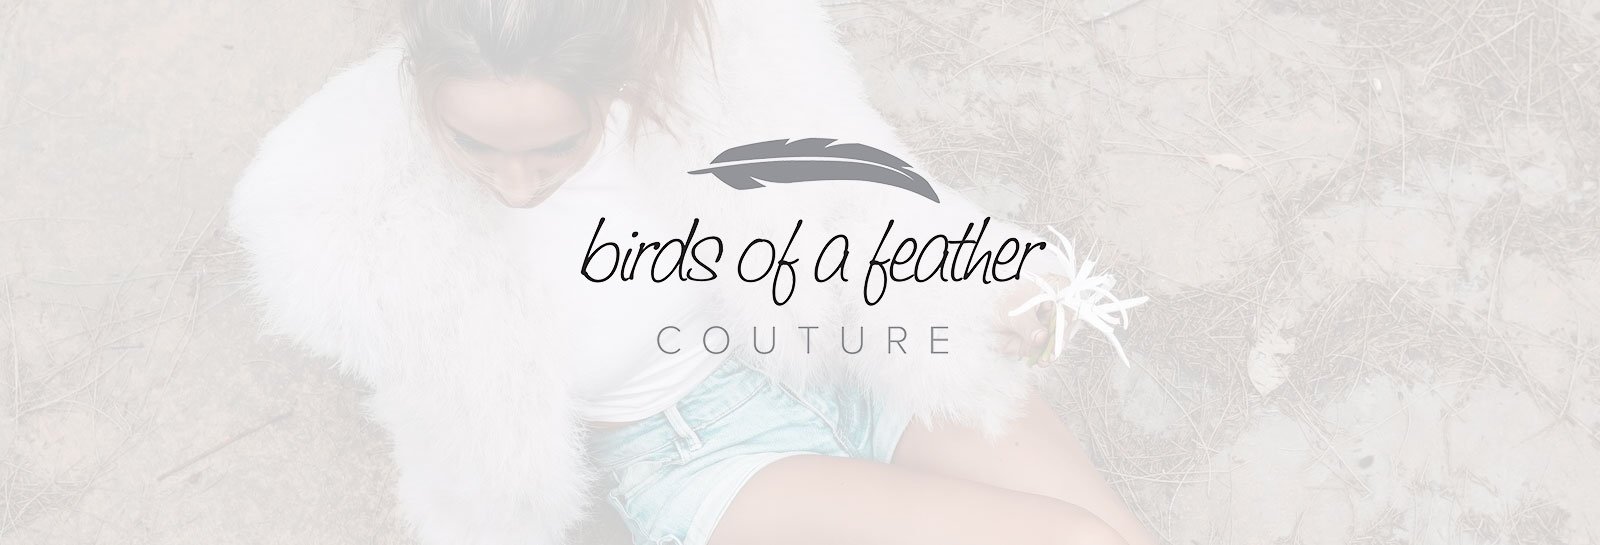 Birds of a Feather Clothing